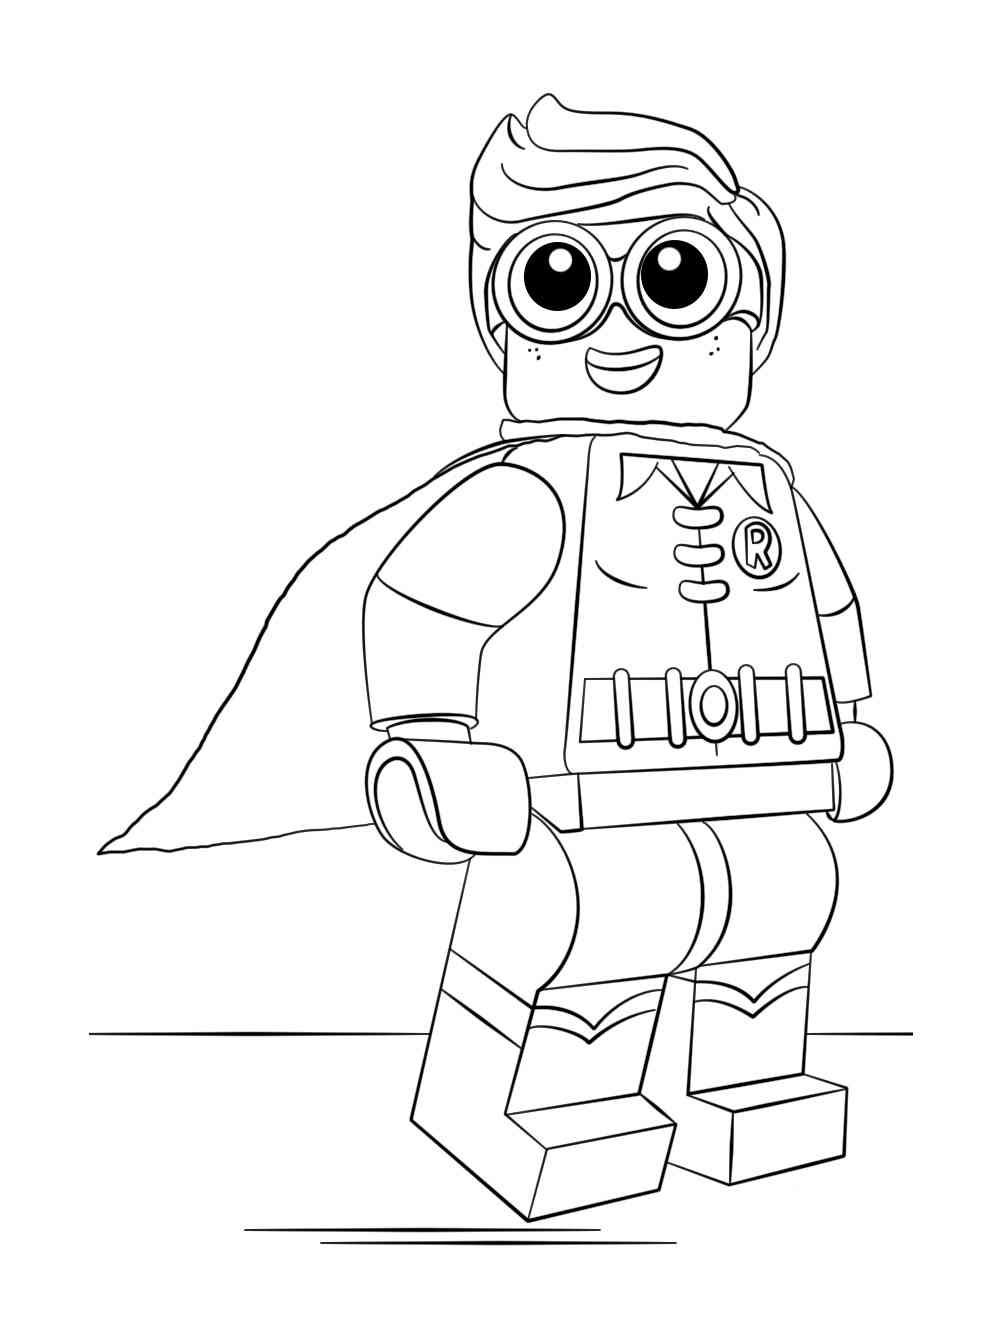 Lego Robin coloring pages